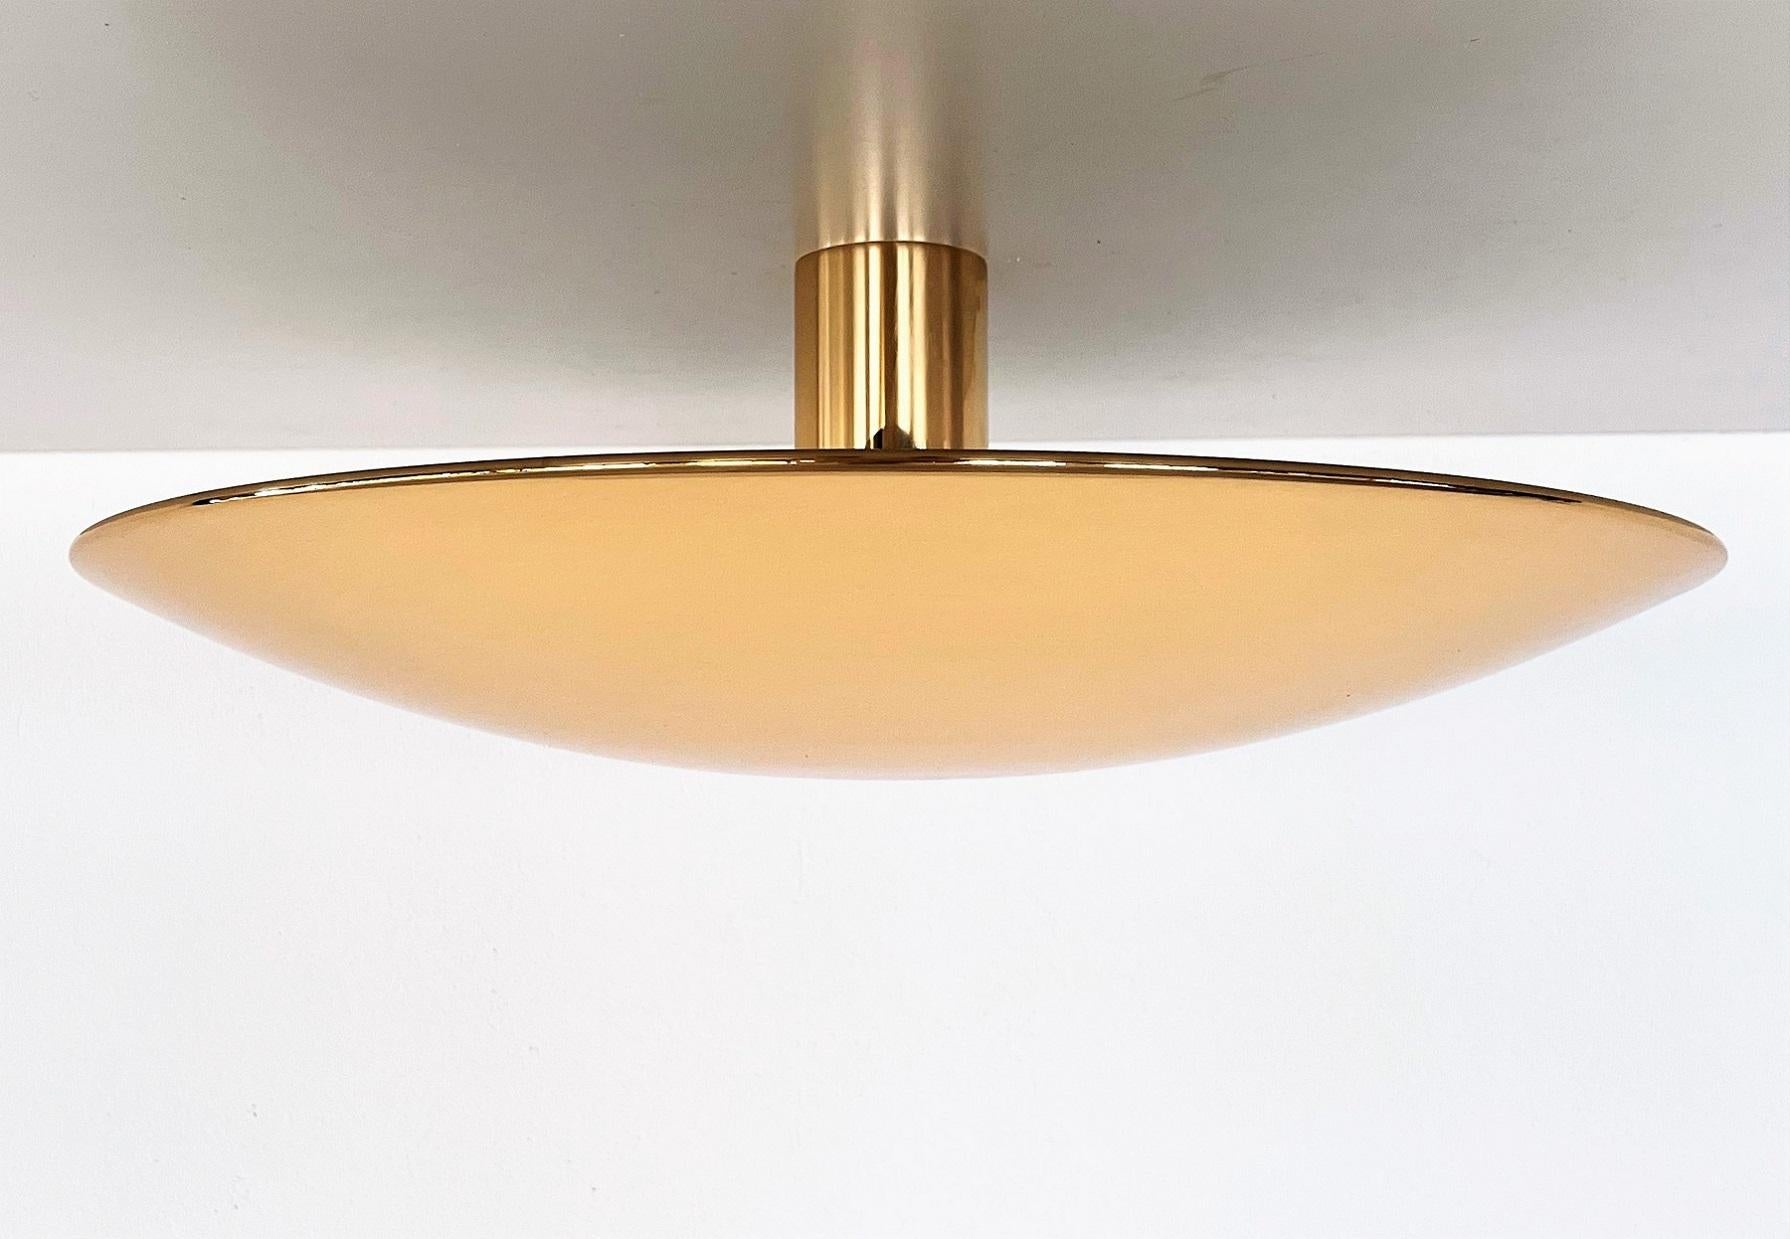 Magnificent, large version of flush-mount light or wall sconce made of full brass by Florian Schulz.
The large round dome plate is screwed on the wall or ceiling unit, which holds five Edison light bulbs.
The full polished brass is very shiny and in